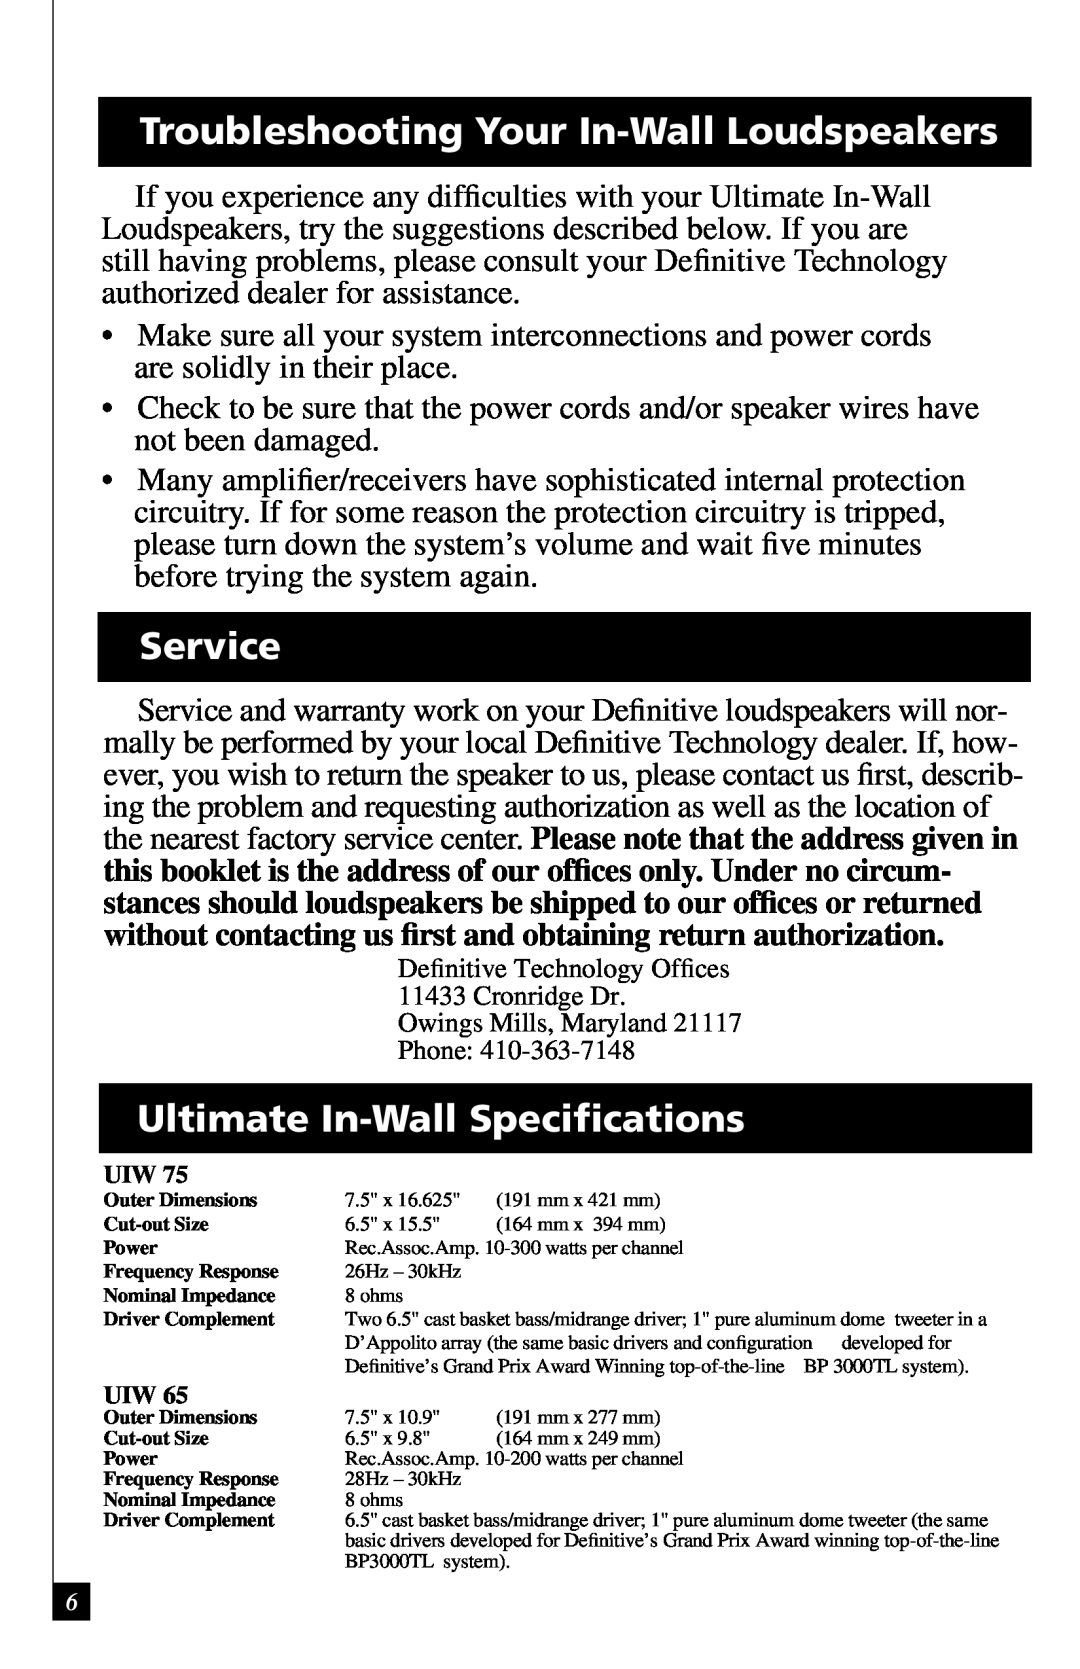 Definitive Technology UIW55, UIW64A, UIW65 Troubleshooting Your In-WallLoudspeakers, Service, Ultimate In-WallSpeciﬁcations 